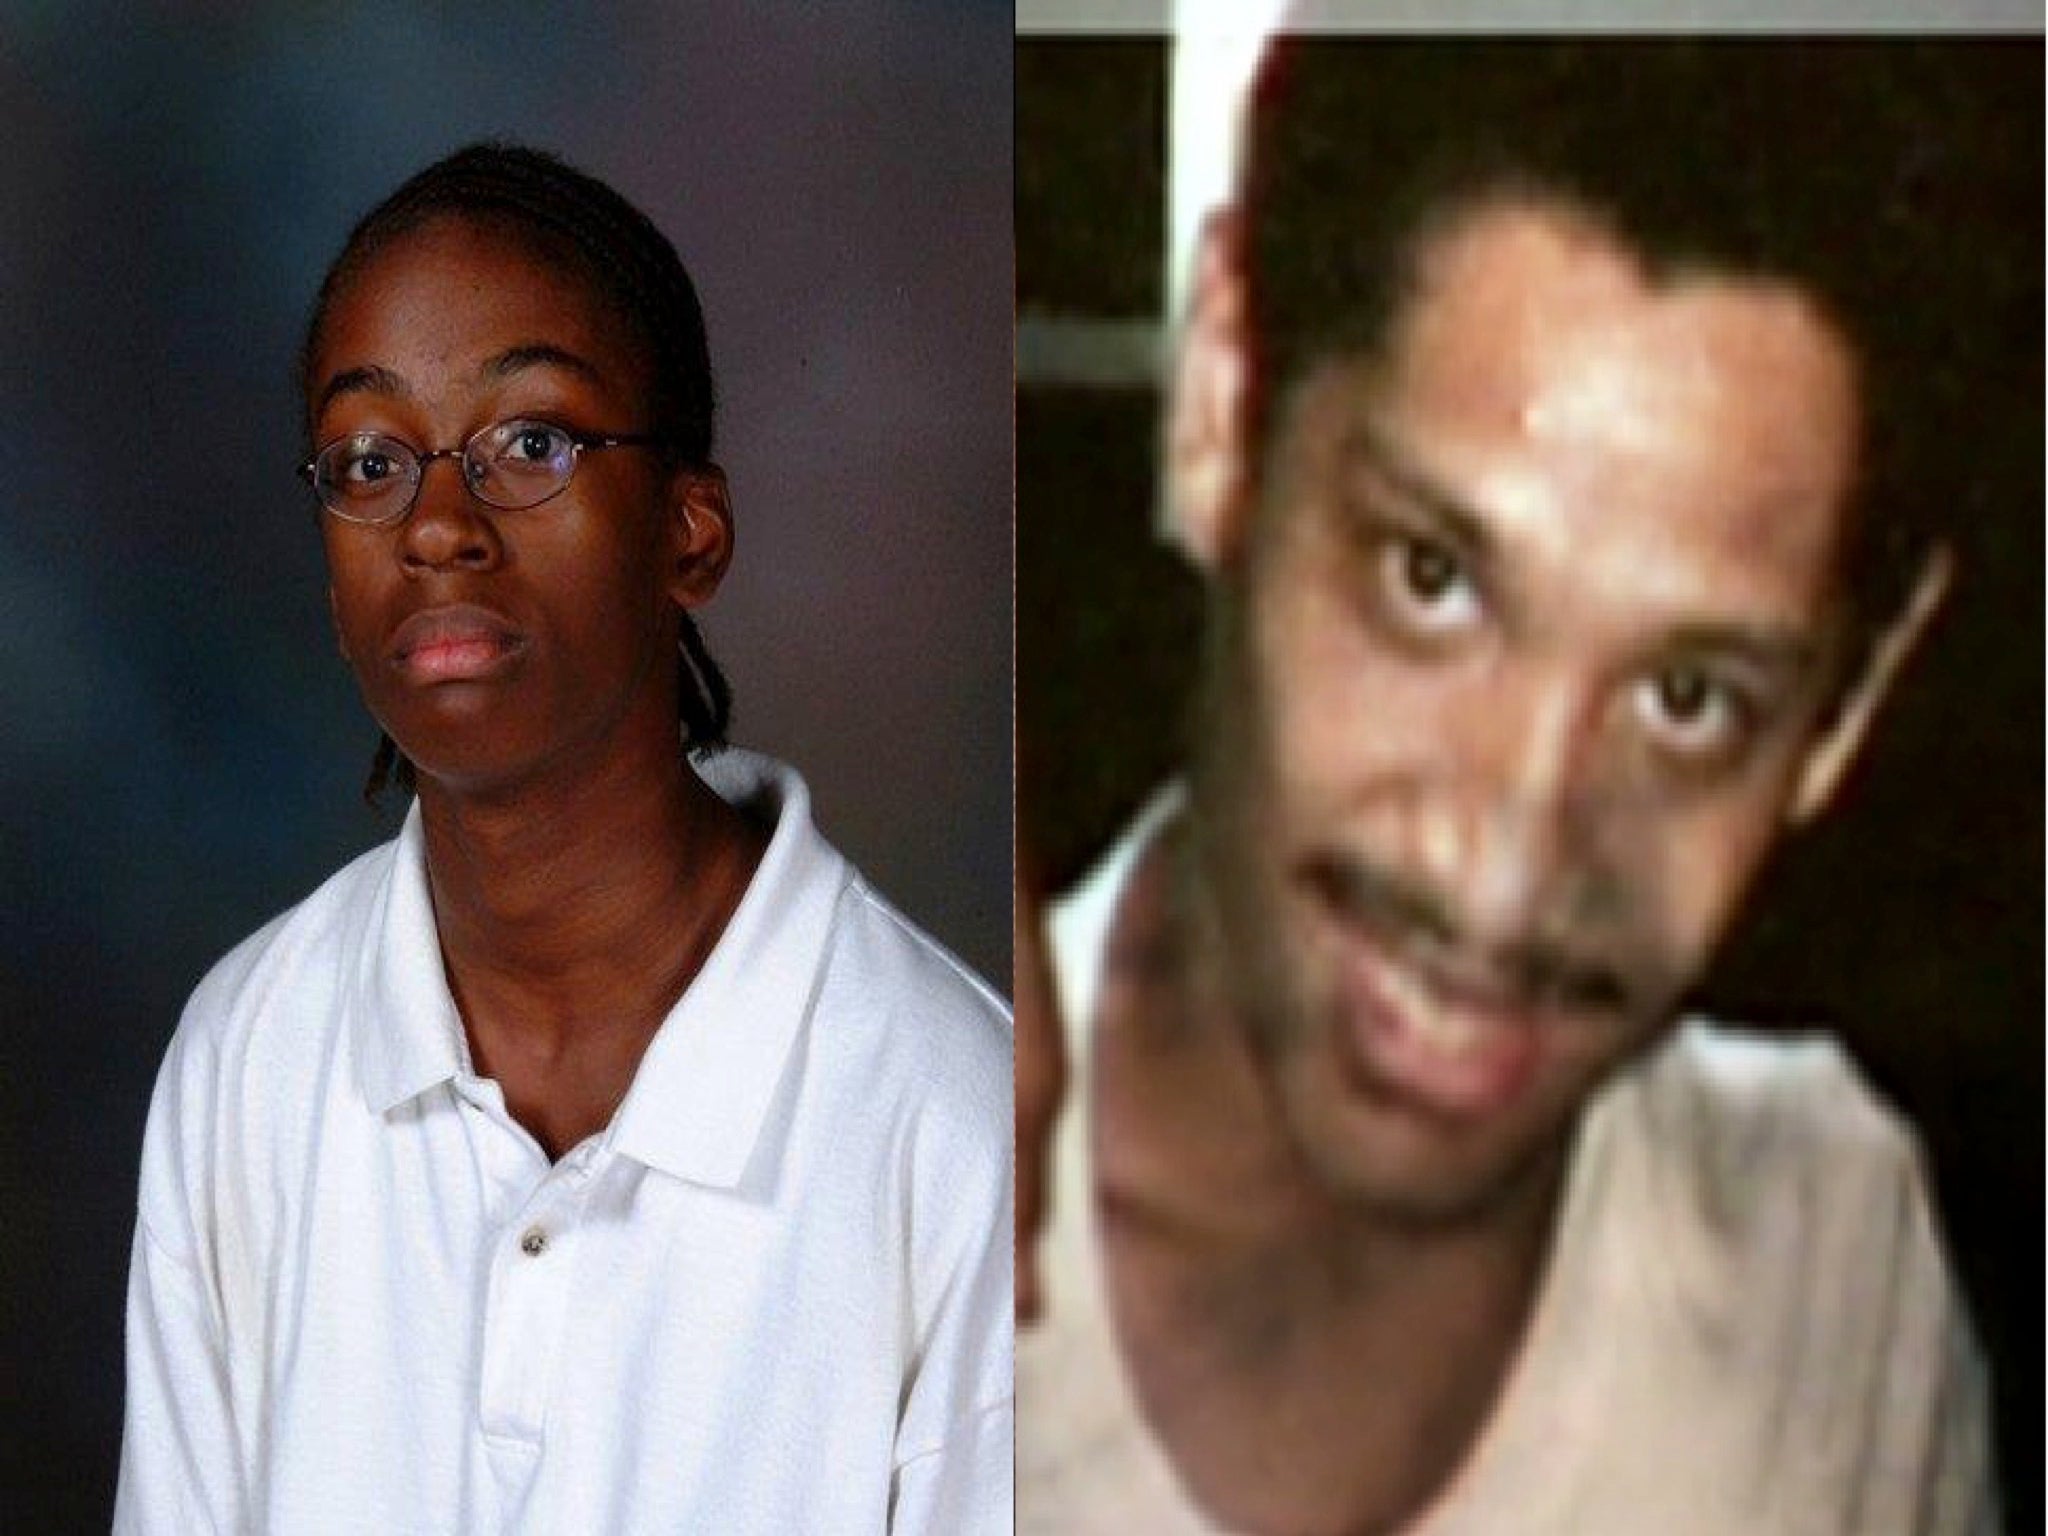 Ronald Madison and James Brissette were among six black people shot by police as they tried to leave New Orleans